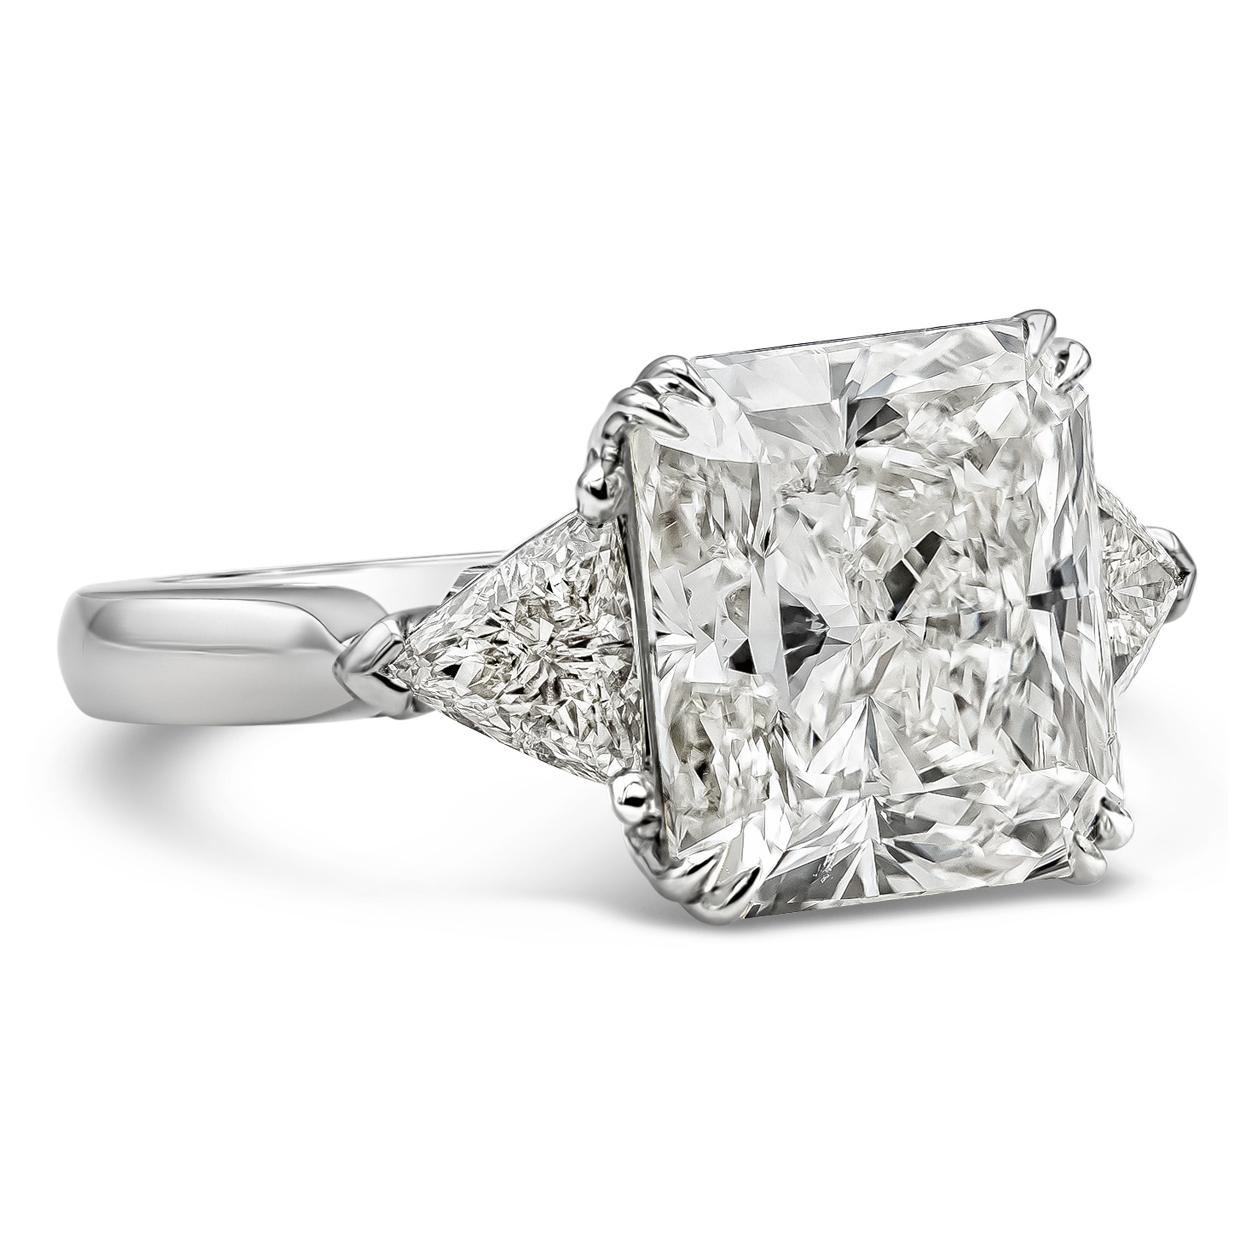 A sophisticated three stone engagement ring showcasing a GIA certified 7.41 carats radiant cut diamond, M Color and SI1 in clarity, set in a timeless eight prong setting. Flanked on each side by brilliant trillion cut diamonds weighing 0.75 carats